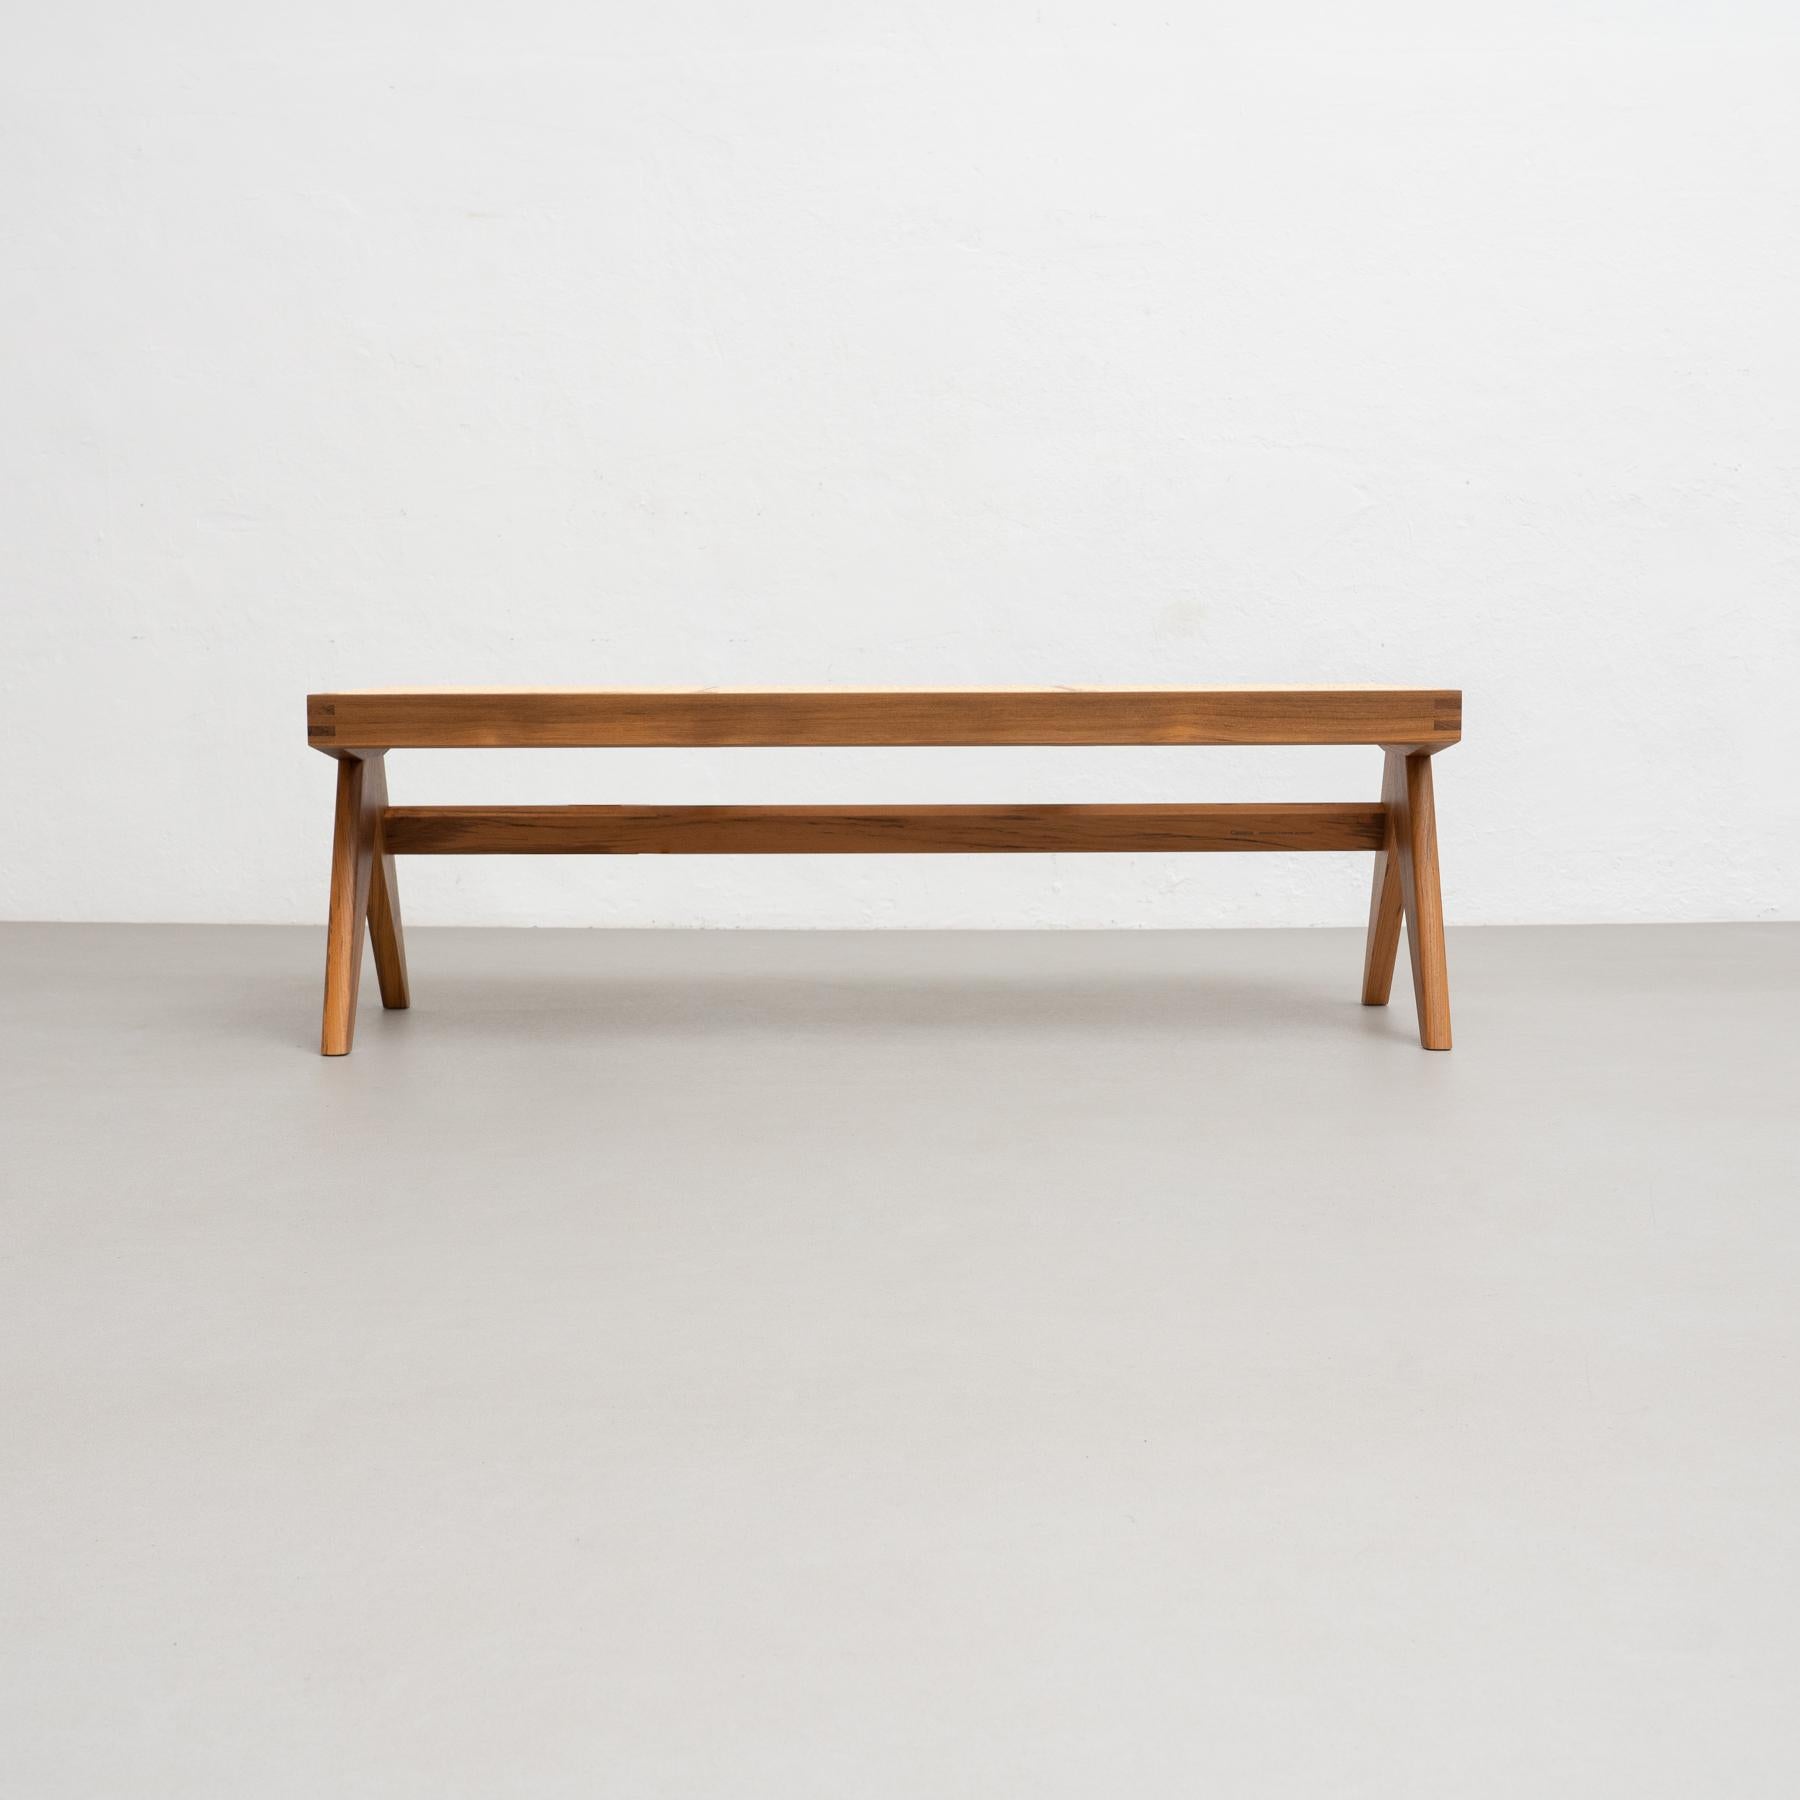 Contemporary Pierre Jeanneret 057 Civil Bench, Wood and Woven Viennese Cane For Sale